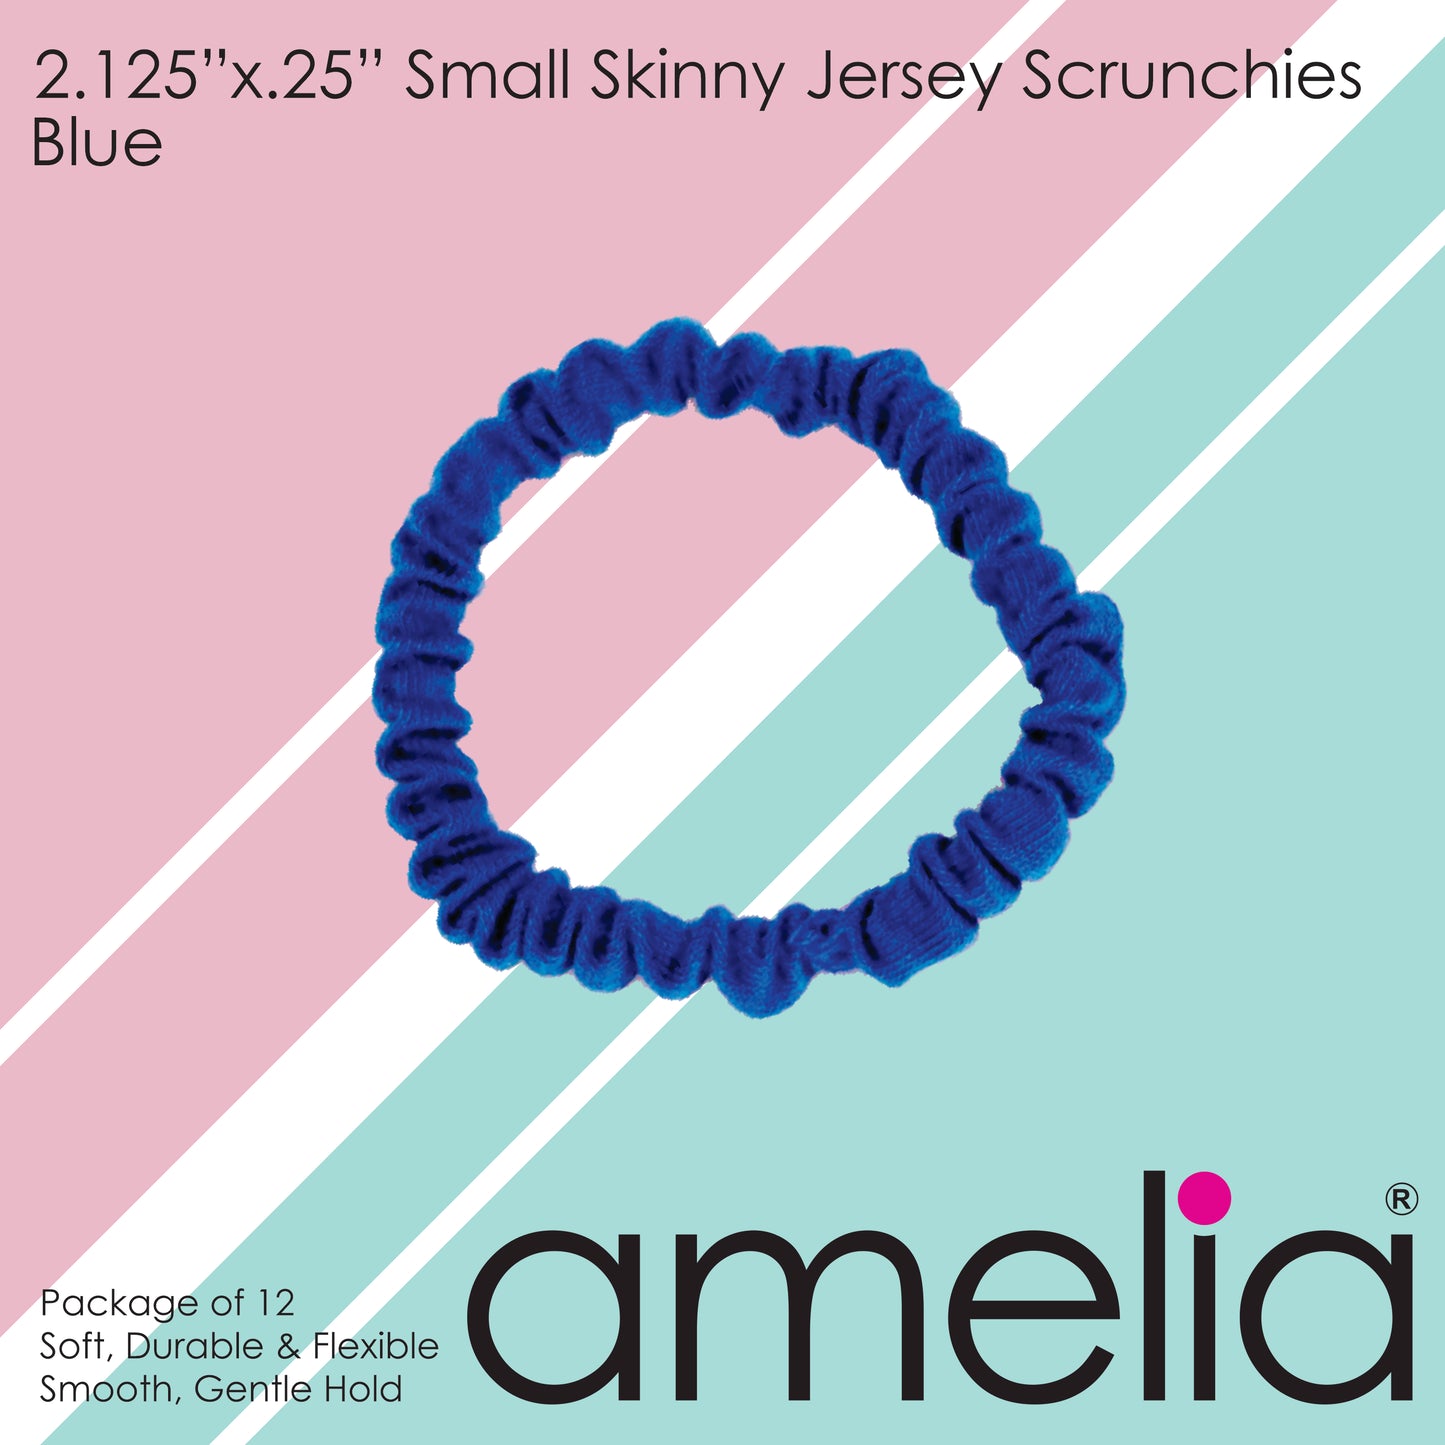 Amelia Beauty, Blue Skinny Jersey Scrunchies, 2.125in Diameter, Gentle on Hair, Strong Hold, No Snag, No Dents or Creases. 12 Pack